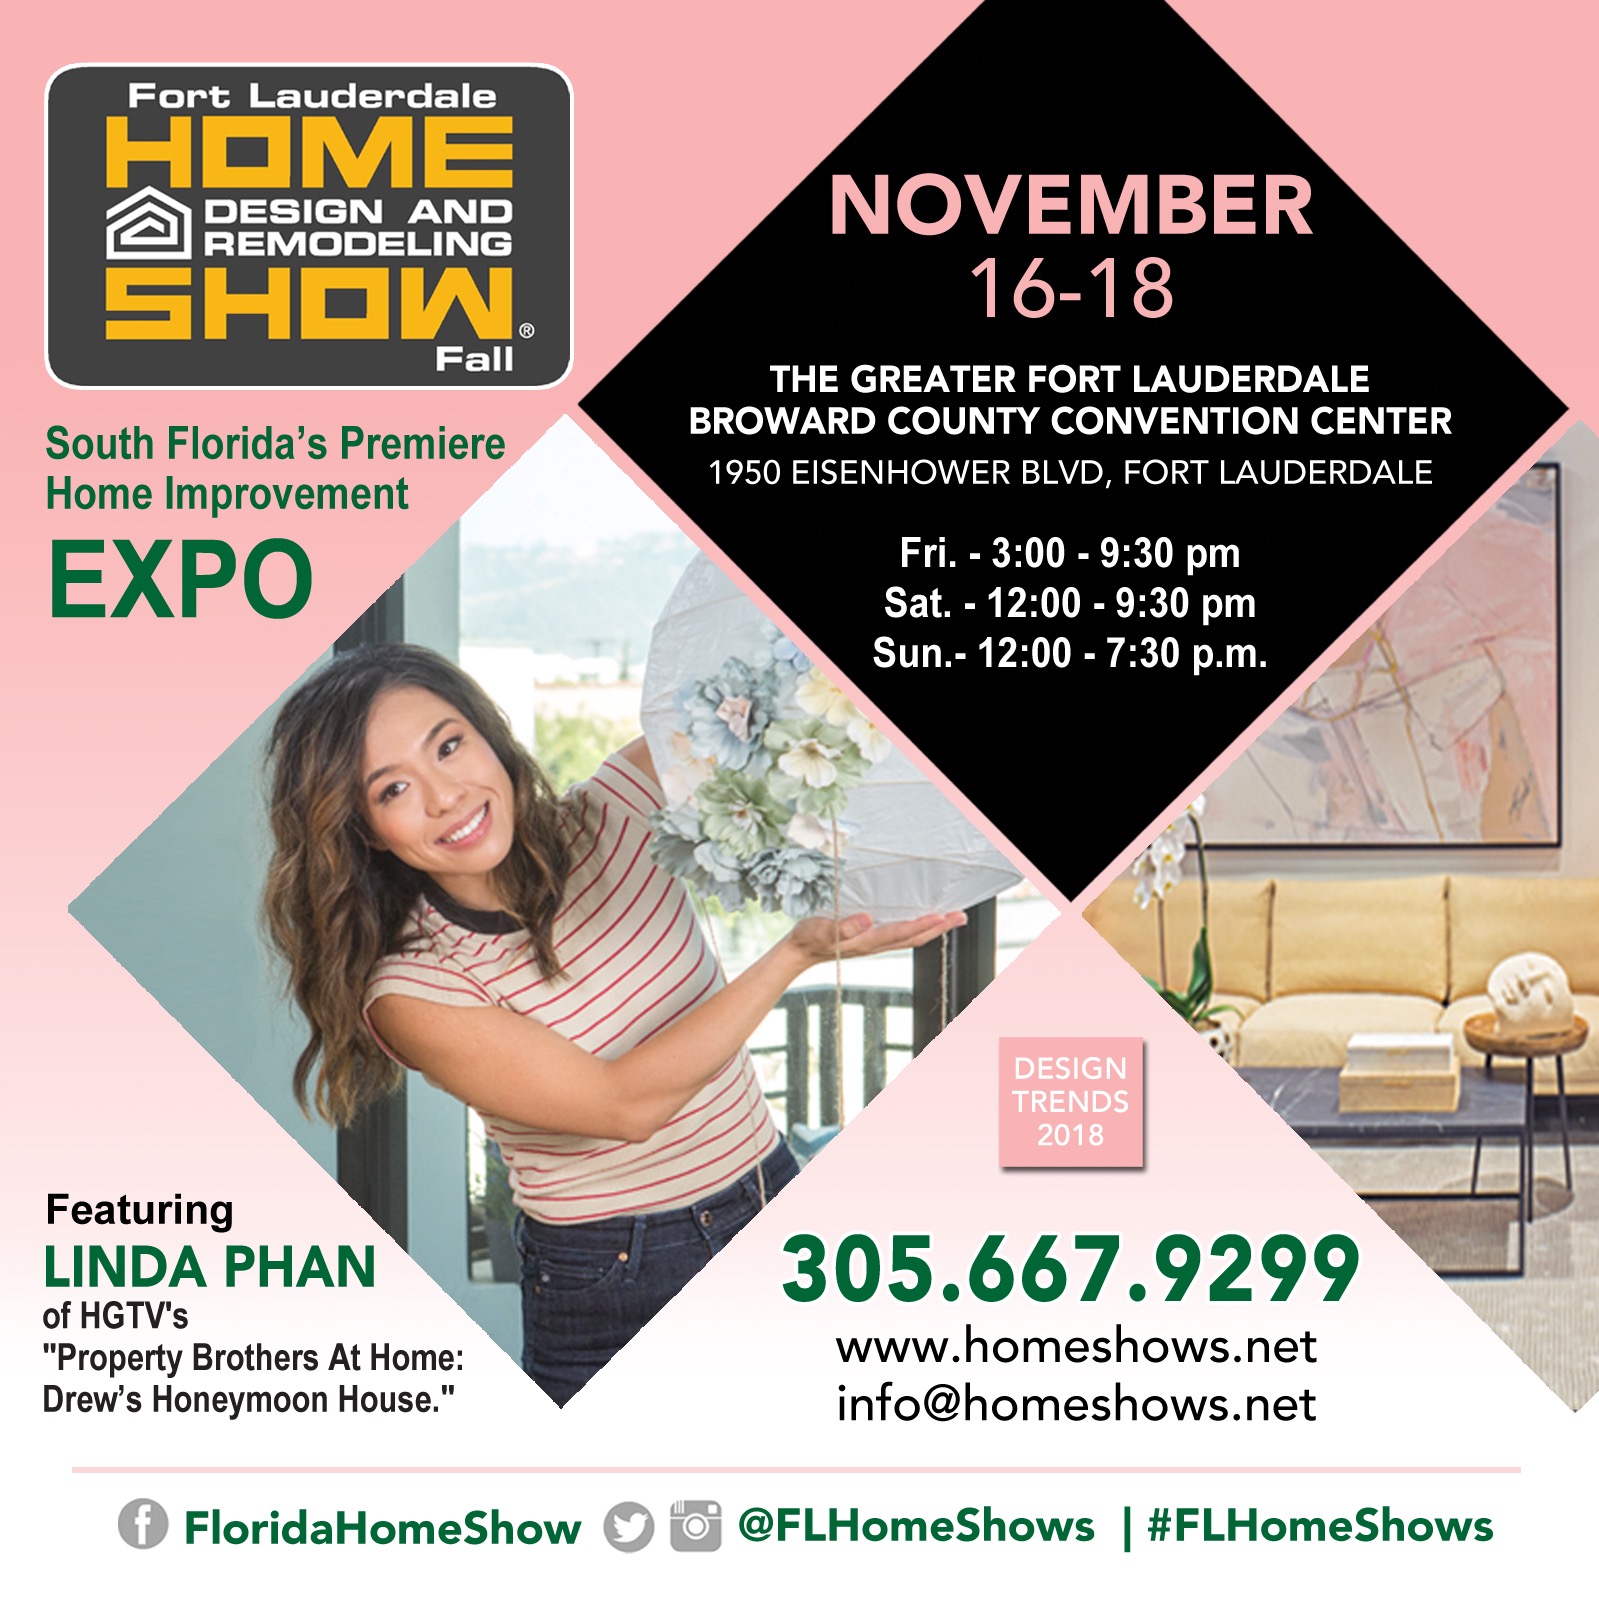 Fort Lauderdale Home Design and Remodeling Show 11/16/18,11/17/18,11/18